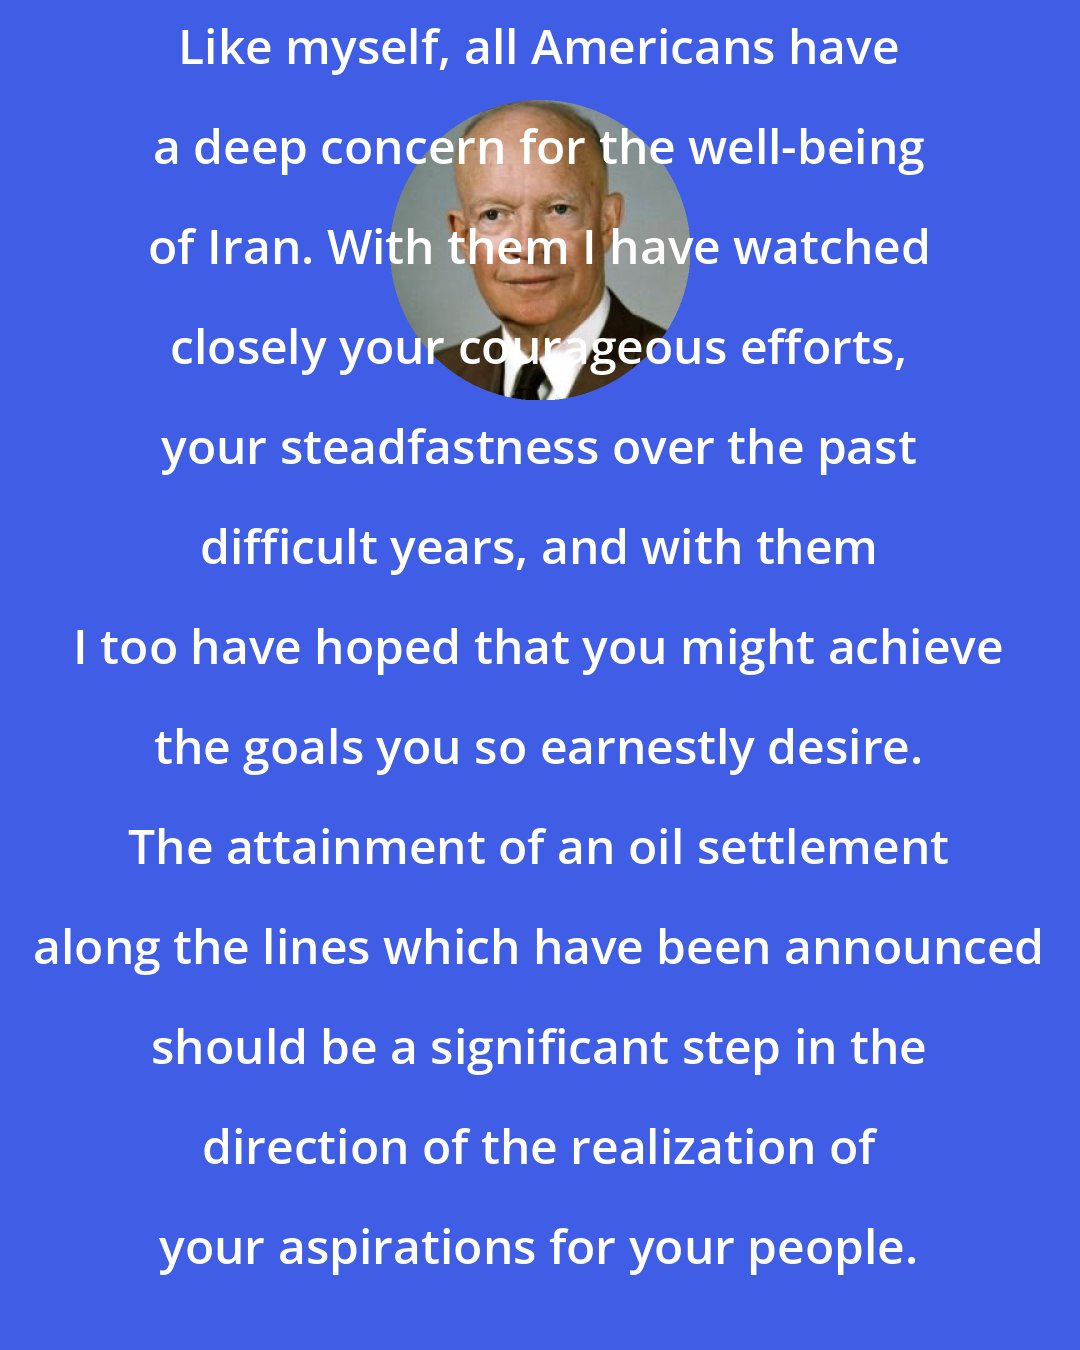 Dwight D. Eisenhower: Like myself, all Americans have a deep concern for the well-being of Iran. With them I have watched closely your courageous efforts, your steadfastness over the past difficult years, and with them I too have hoped that you might achieve the goals you so earnestly desire. The attainment of an oil settlement along the lines which have been announced should be a significant step in the direction of the realization of your aspirations for your people.